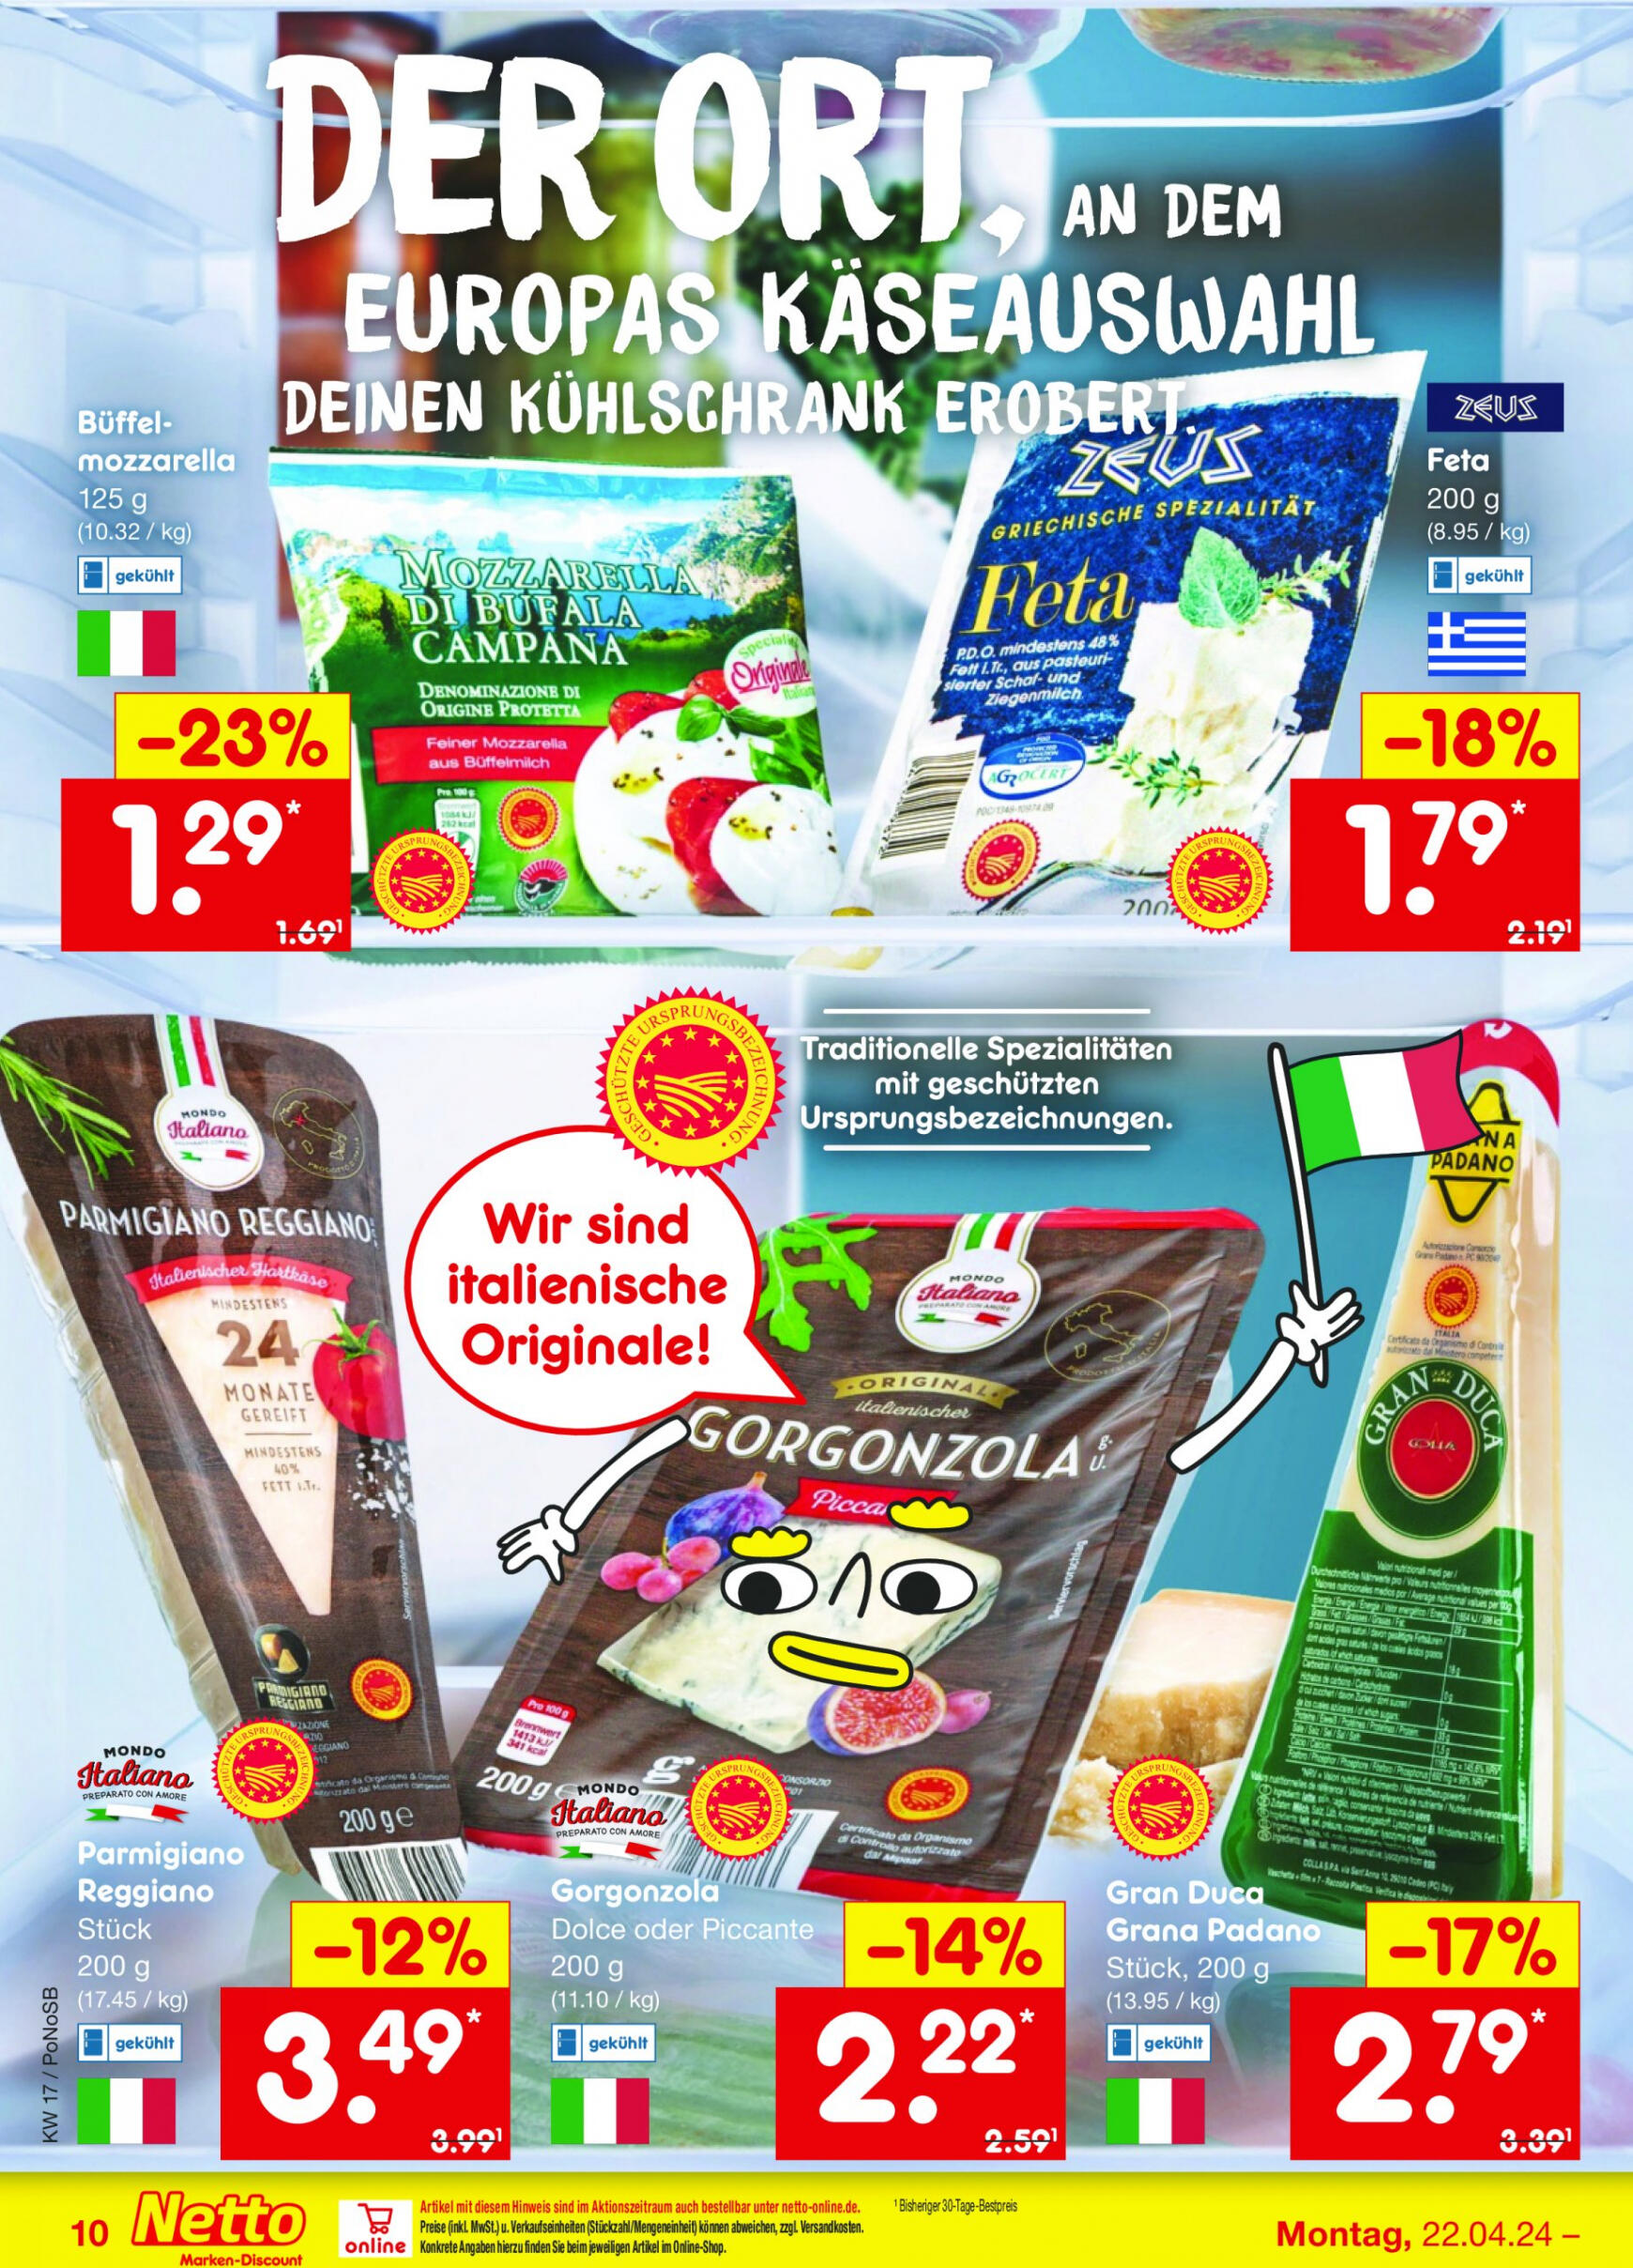 netto - Flyer Netto aktuell 22.04. - 27.04. - page: 10